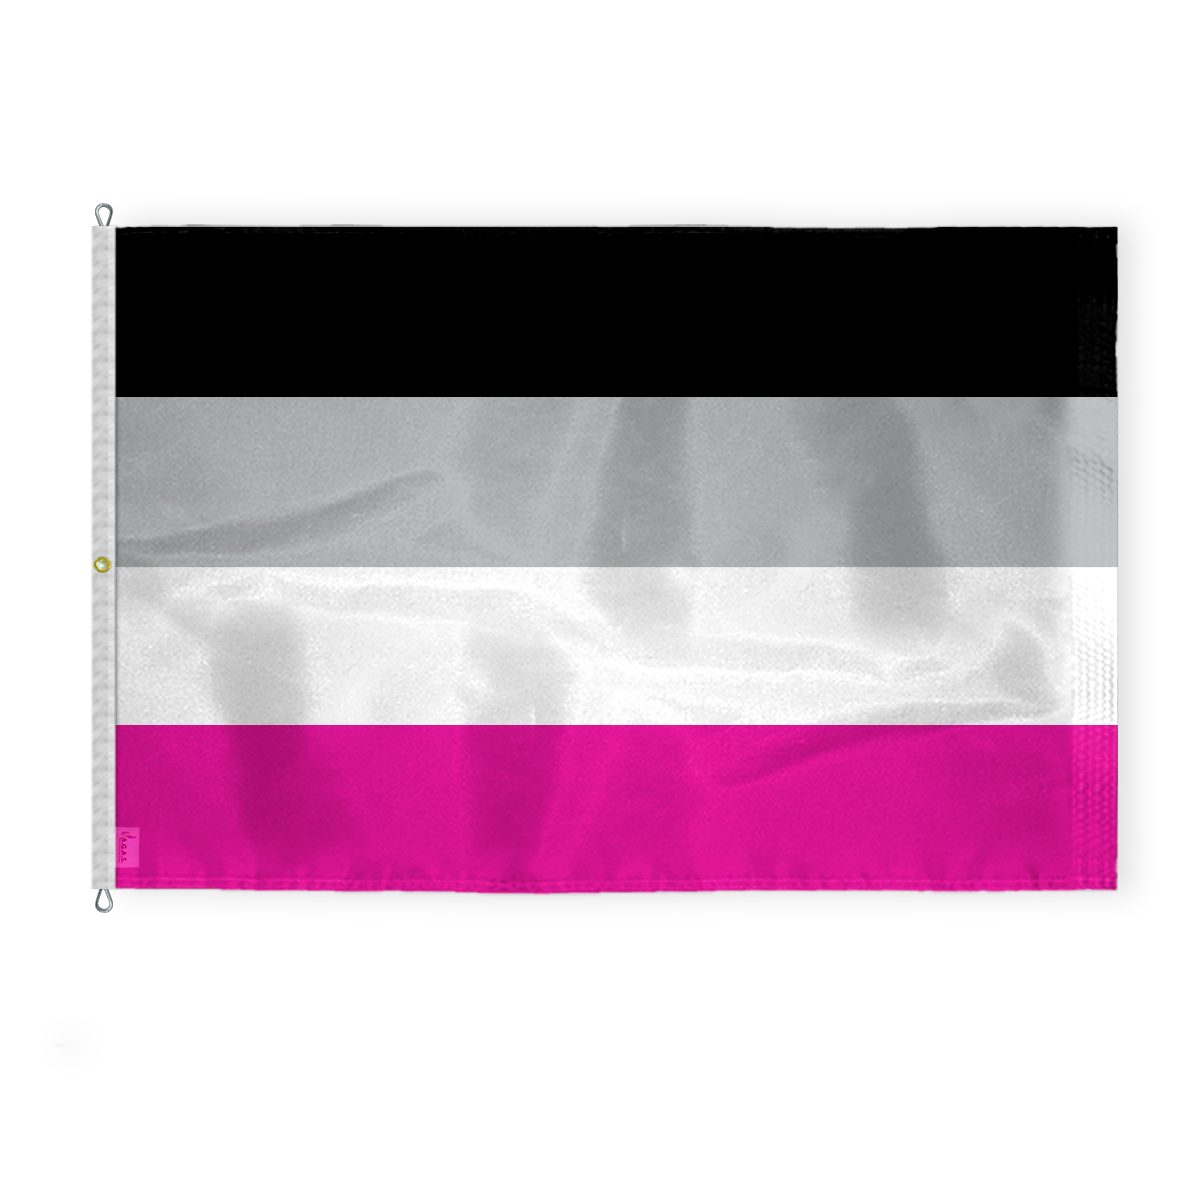 AGAS Large Gynephilia Pride Flag 10x15 Ft - Double Sided Printed 200D Nylon